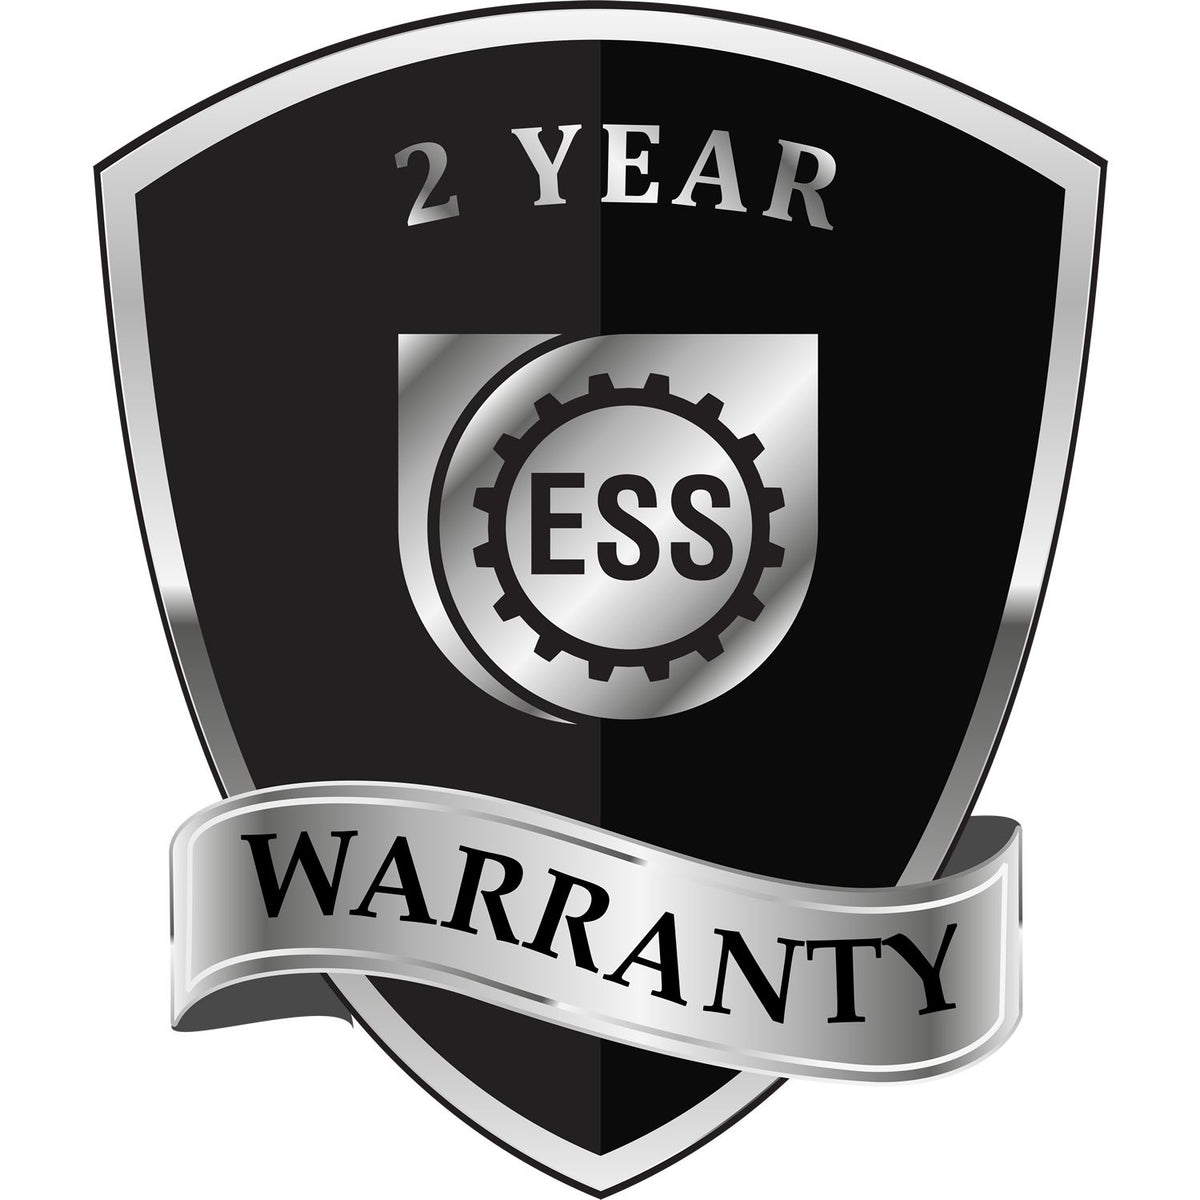 A black and silver badge or emblem showing warranty information for the Hybrid Idaho Landscape Architect Seal